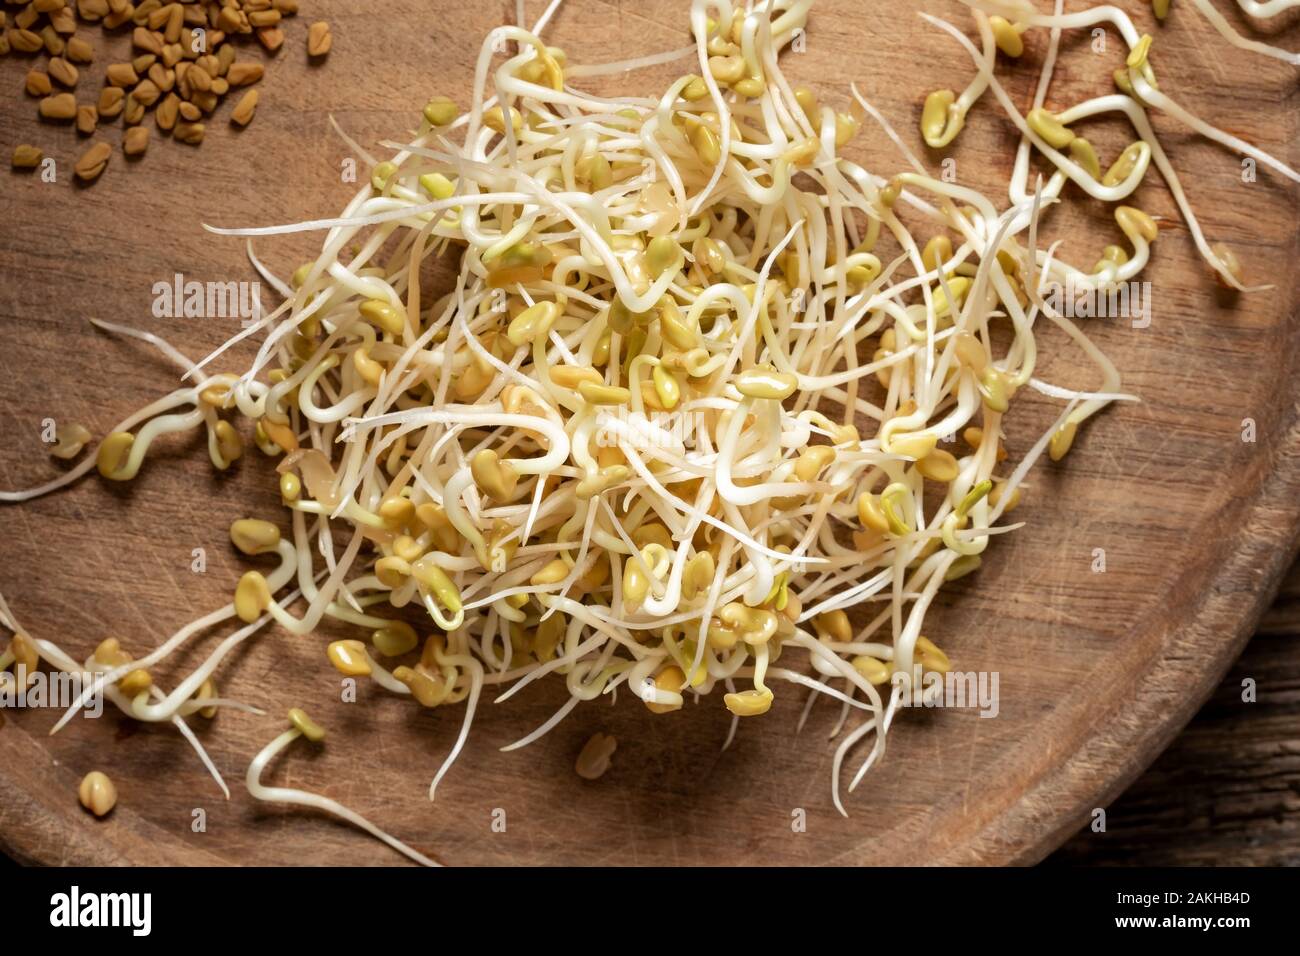 Fresh fenugreek sprouts on a table, with dry seeds in the background Stock Photo